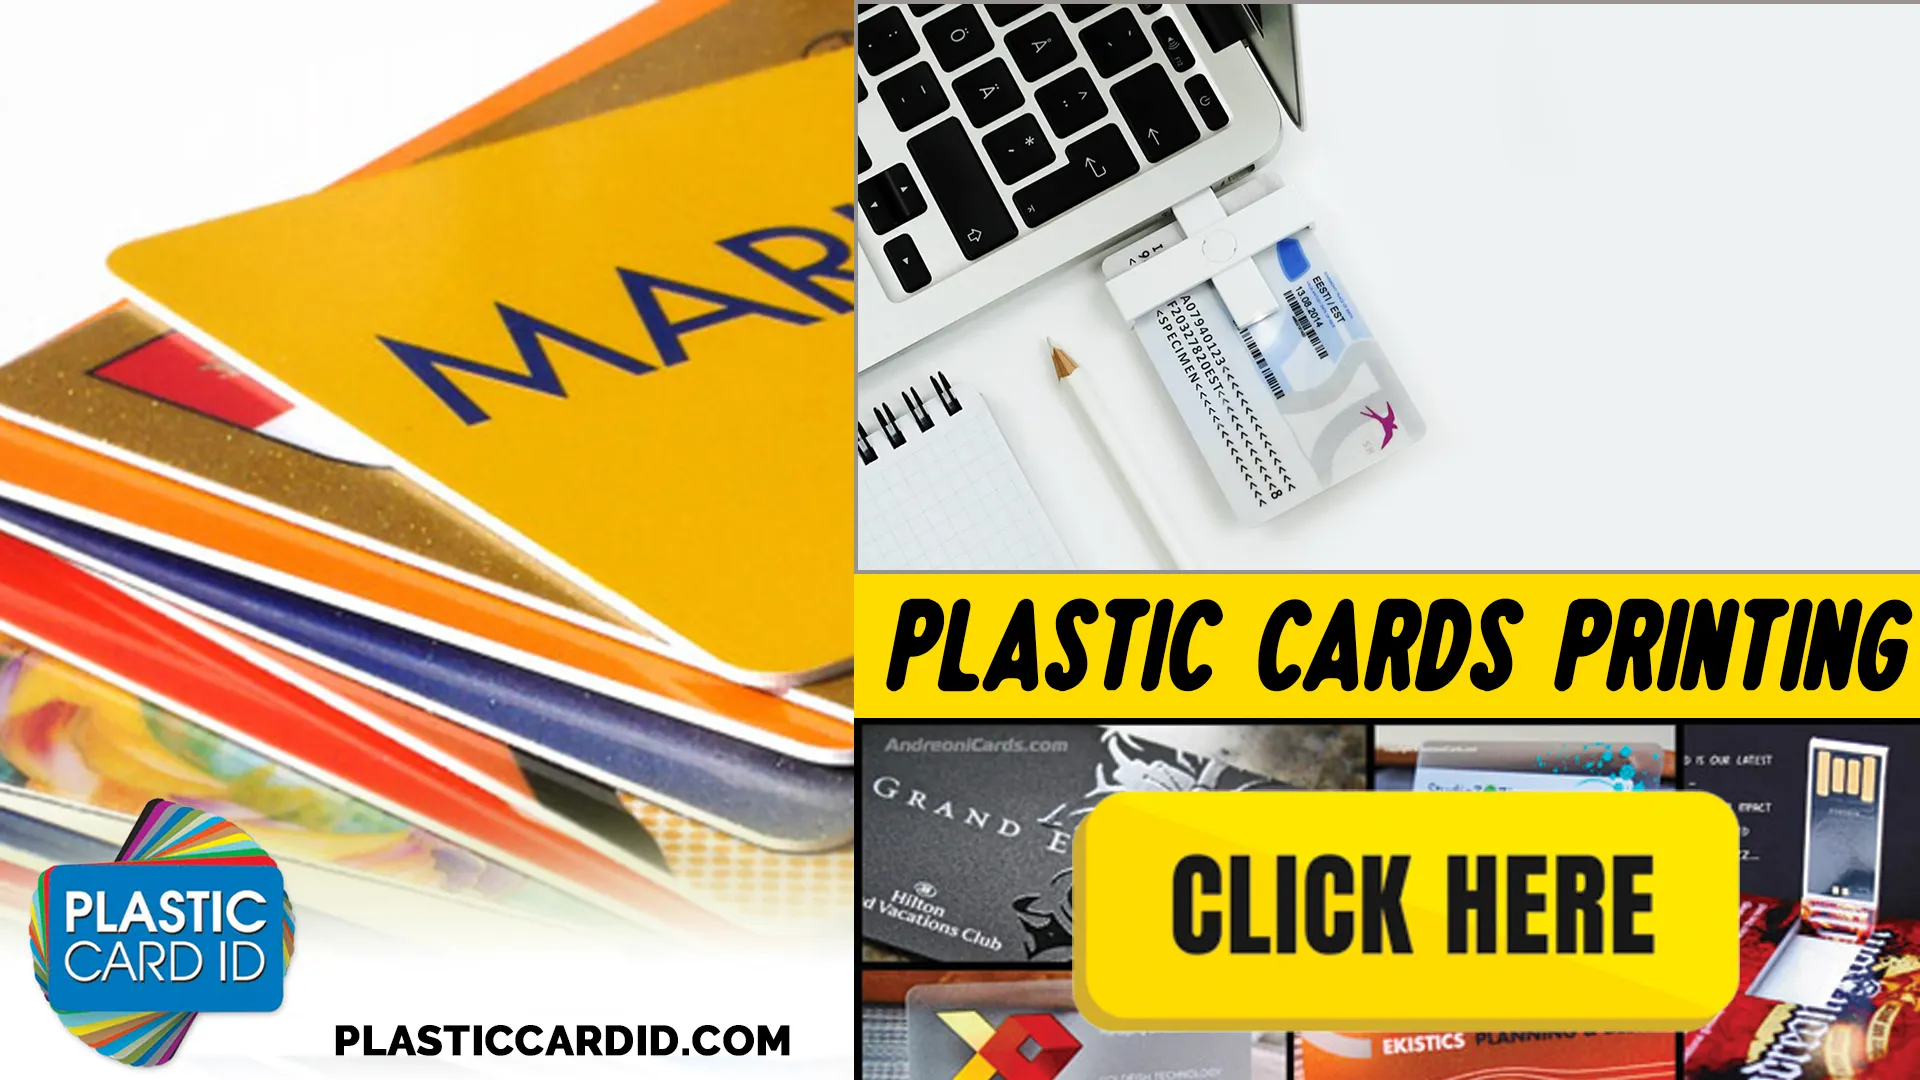 Experience the Benefits of Top-Tier Card Printing Brands with Plastic Card ID
